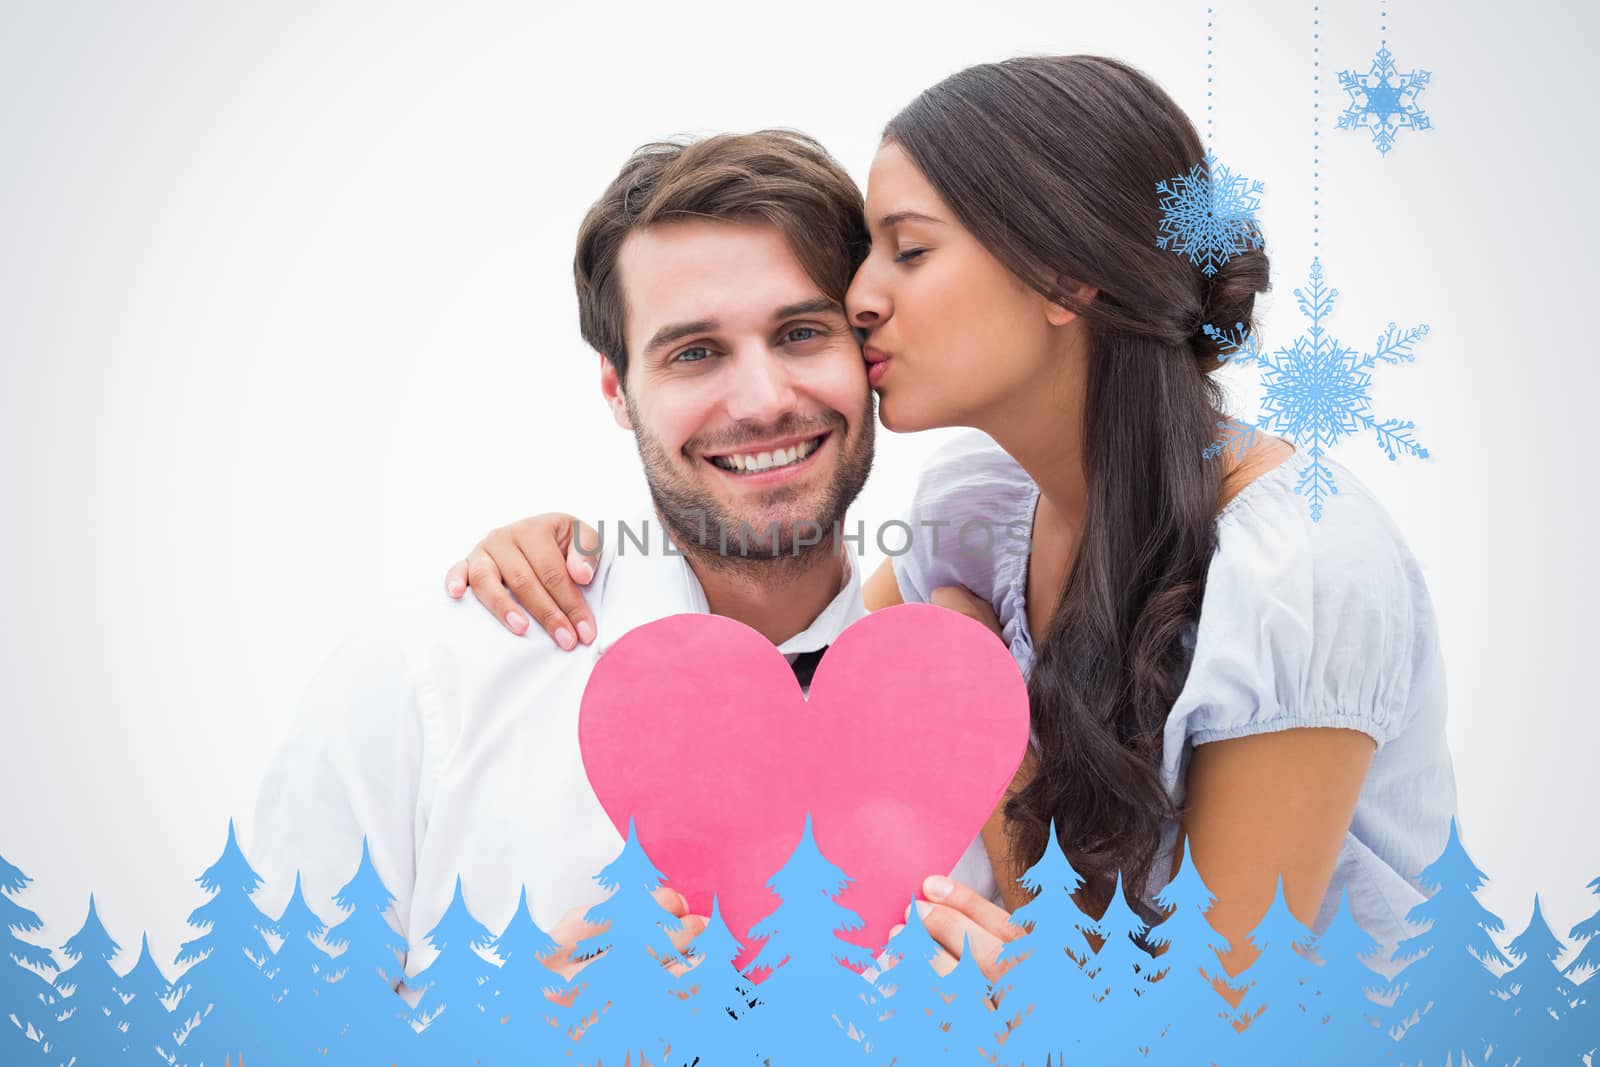 Pretty brunette giving boyfriend a kiss and her heart against snowflakes and fir trees in blue